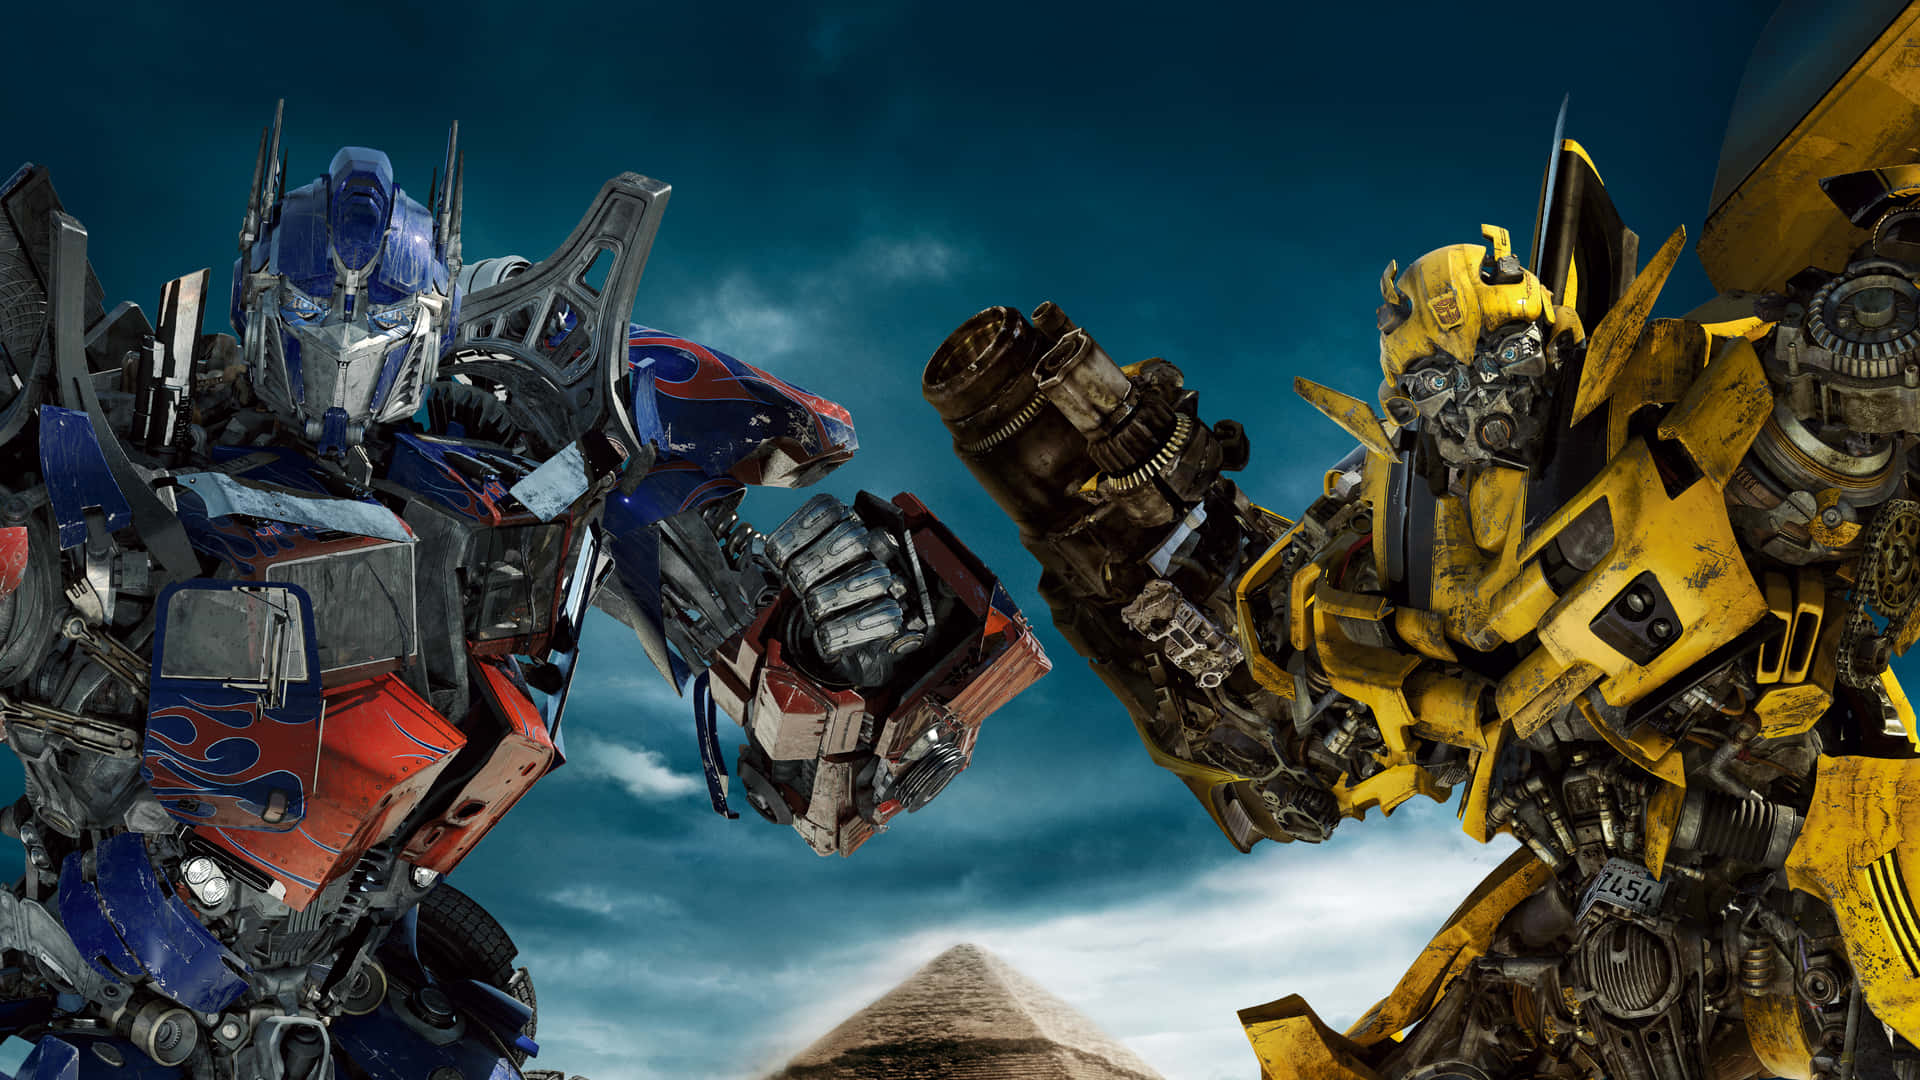 The Iconic Optimus Prime in Stunning 4K Resolution Wallpaper